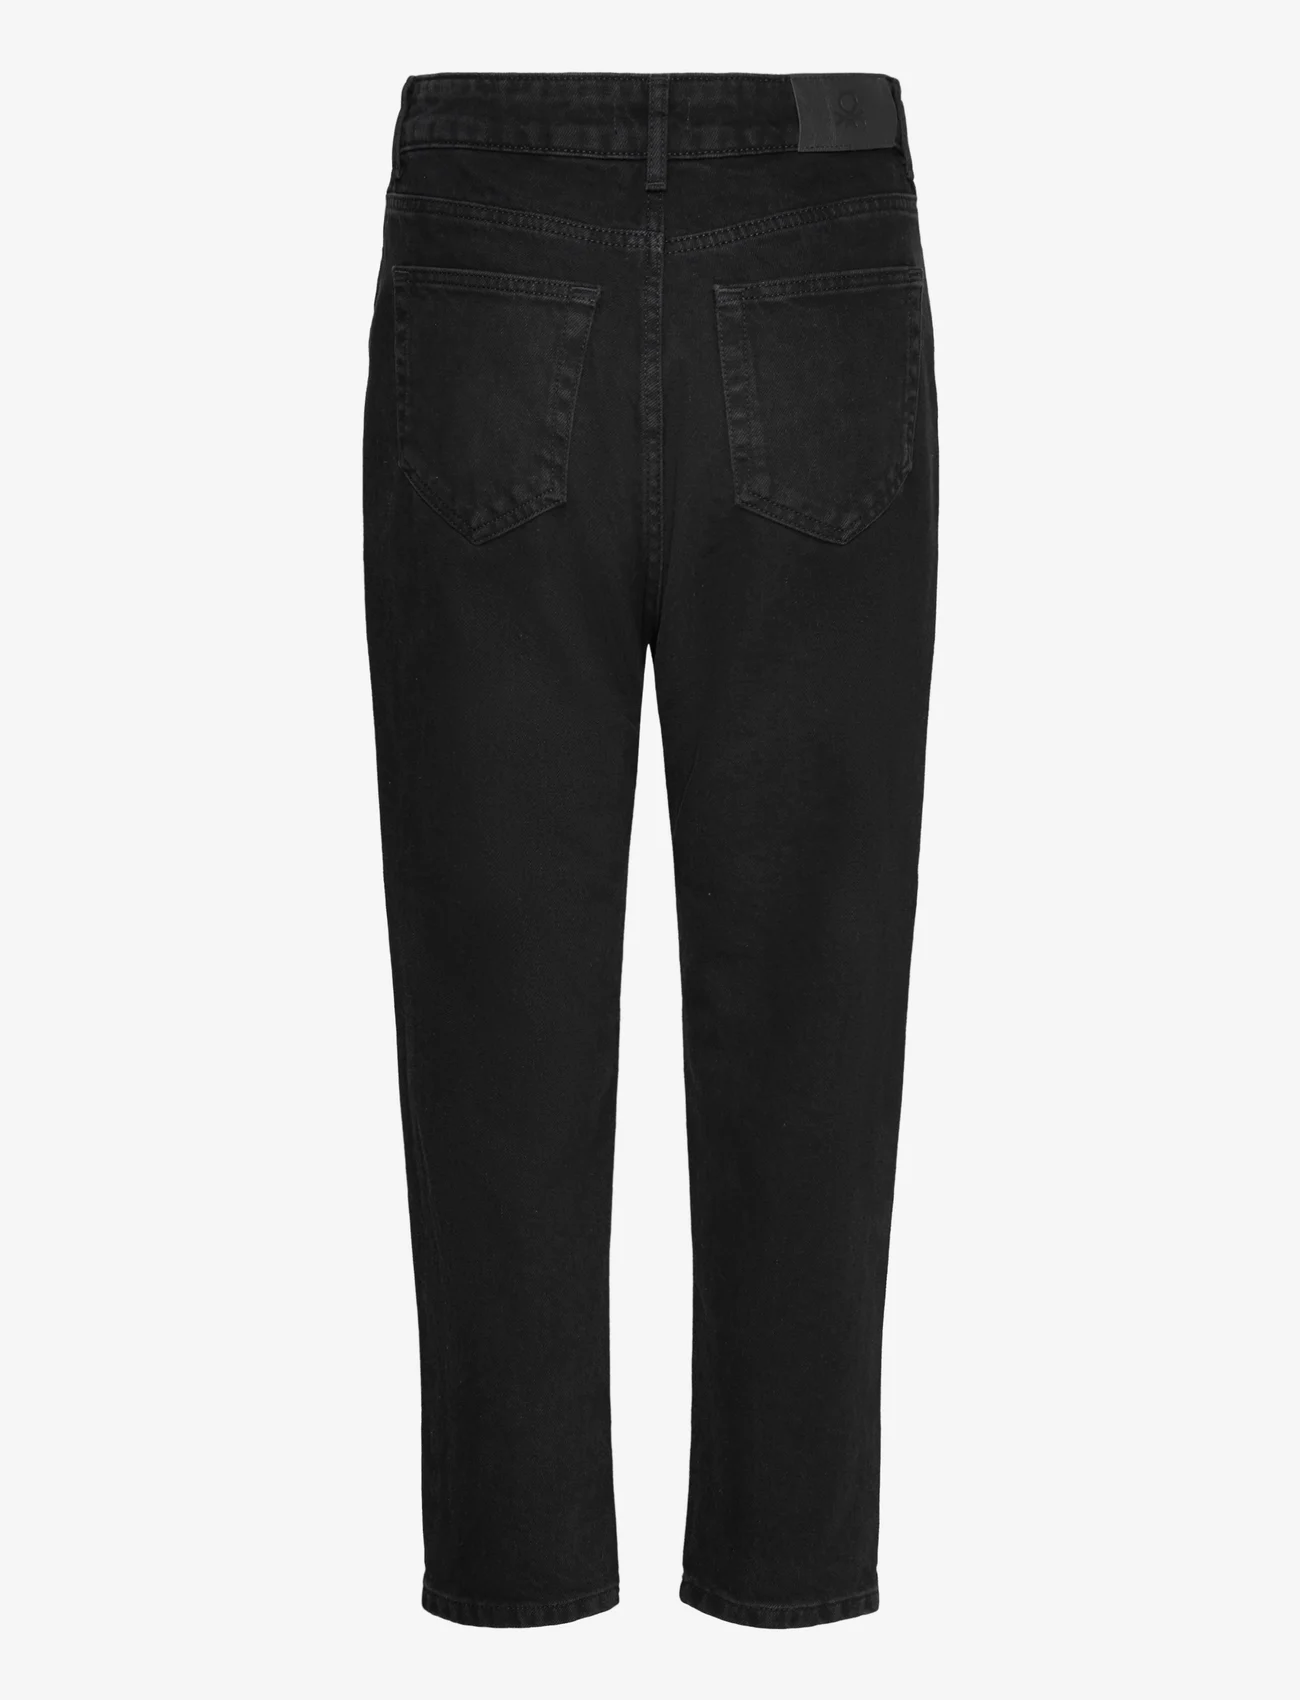 United Colors of Benetton - TROUSERS - straight jeans - black - 1